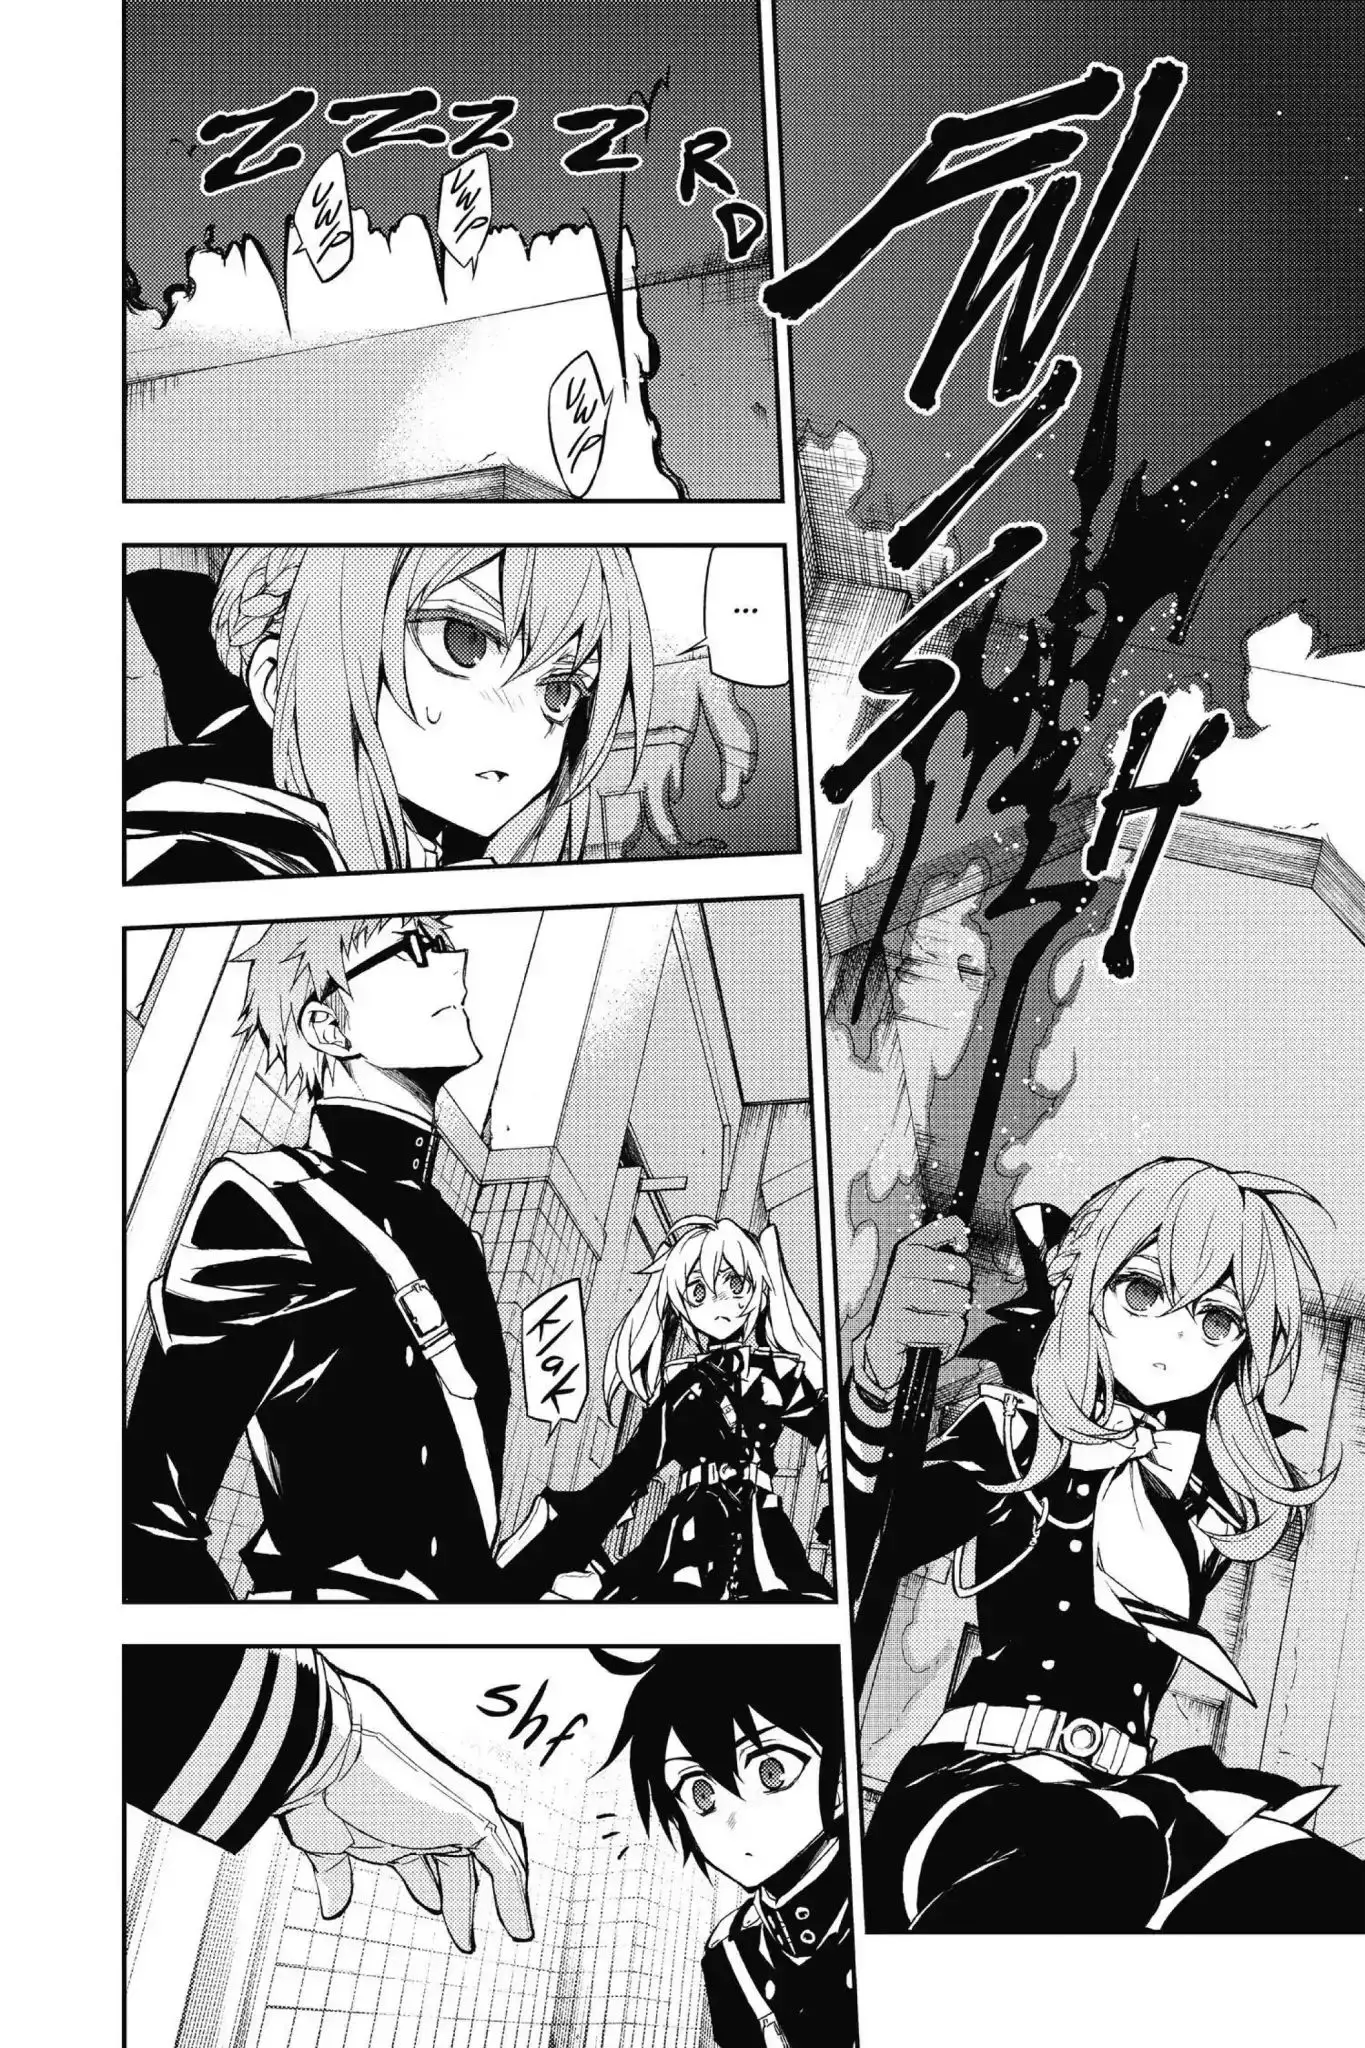 Seraph Of The End - 32 page 9-32879a94